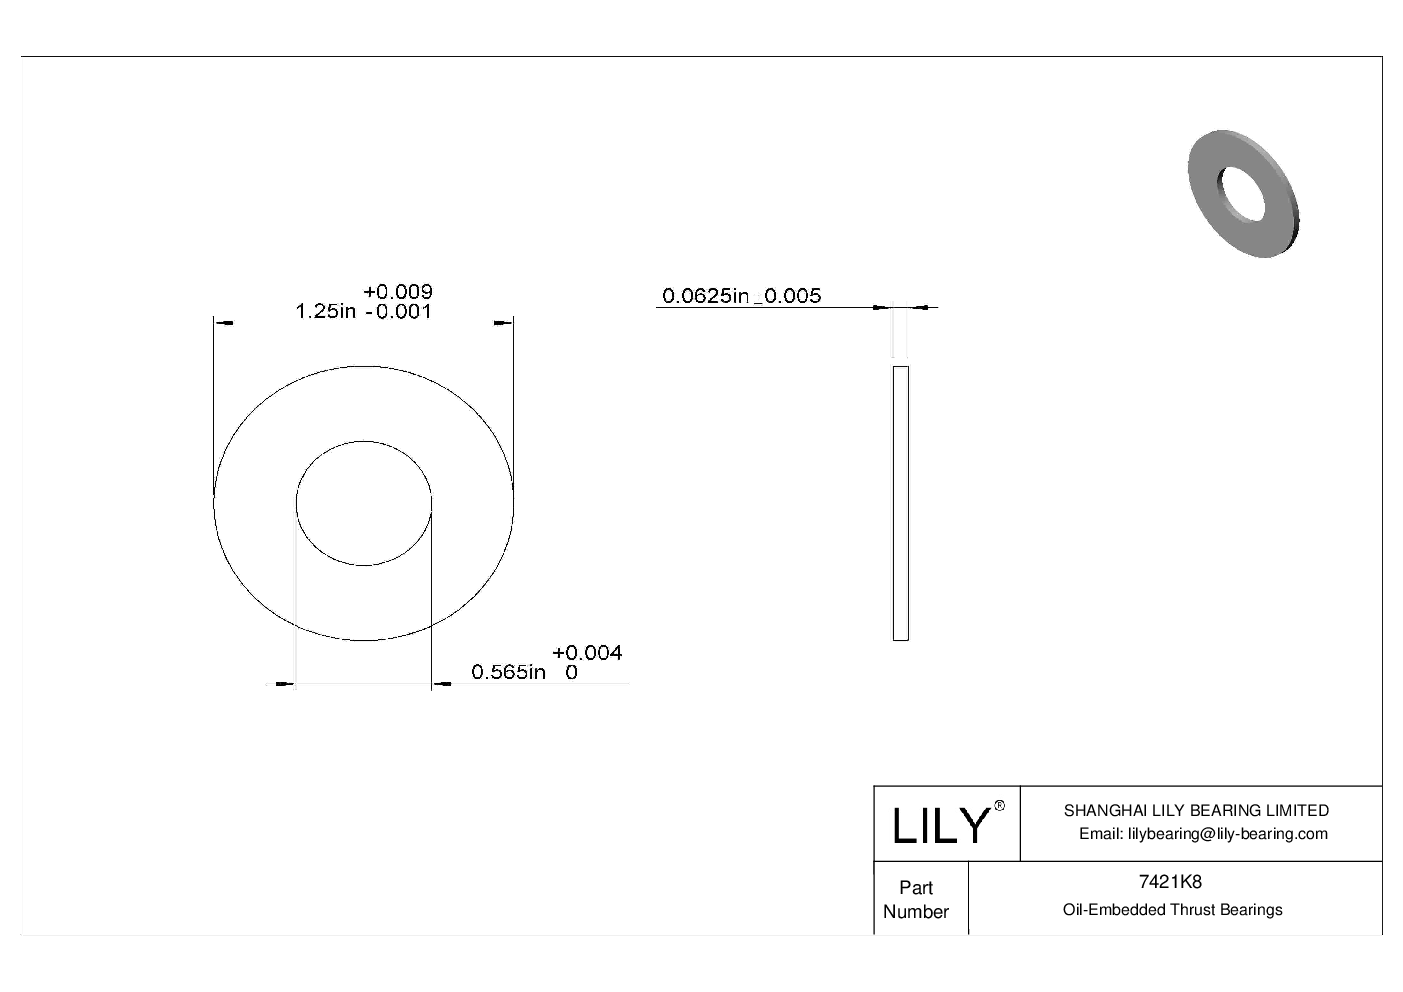 HECBKI Ultra-Low-Friction Oil-Embedded Thrust Bearings cad drawing